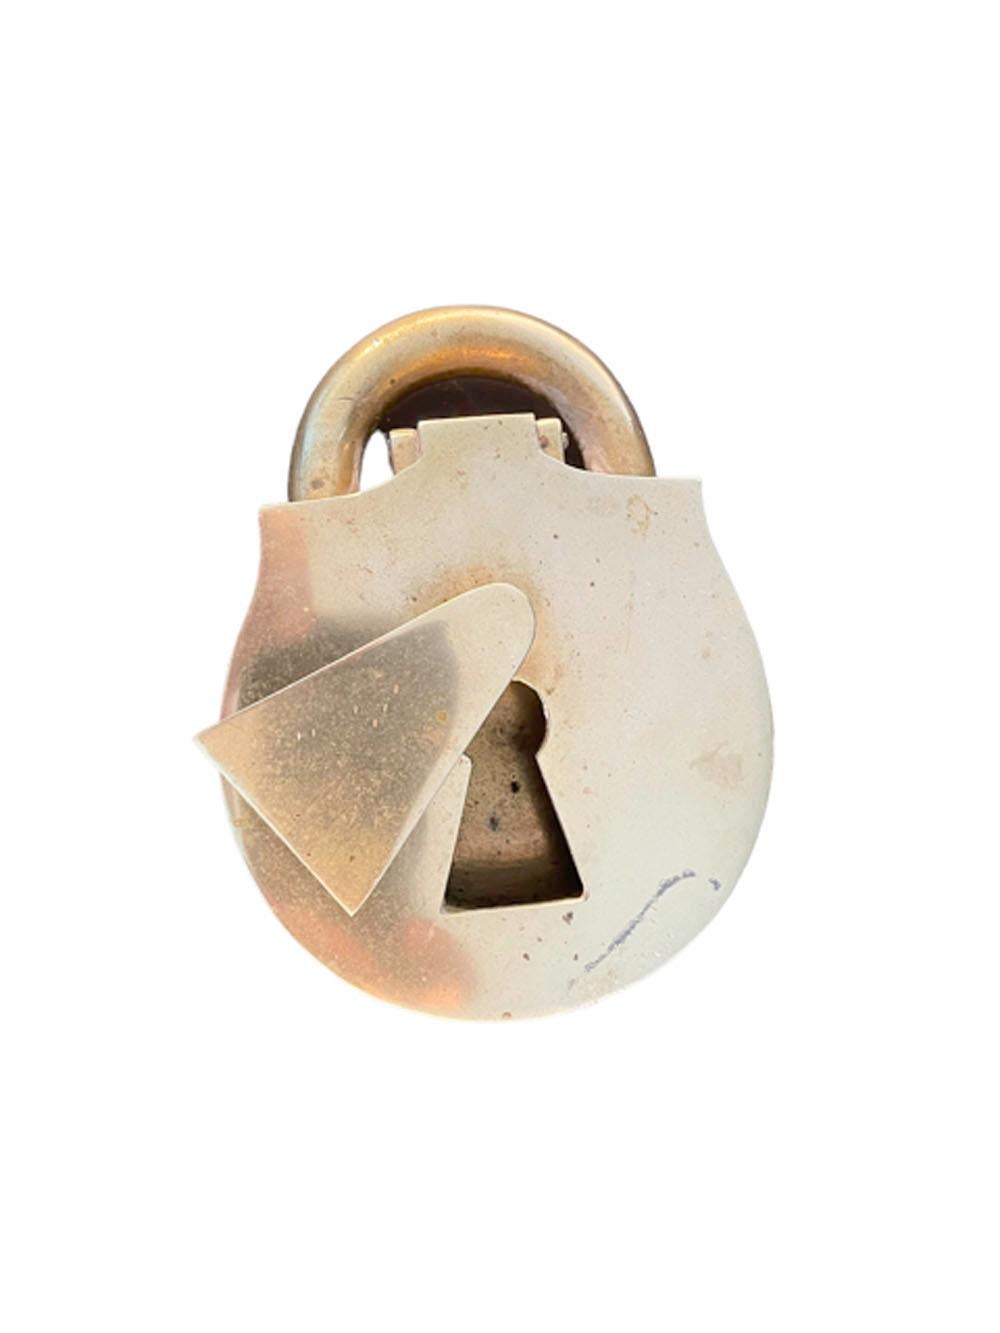 Vintage solid cast brass ashtray made in the form of a padlock. the hinged front (top) with a pivoting keyhole cover opens to reveal the ash bowl, the back of the keyhole cover id marked 